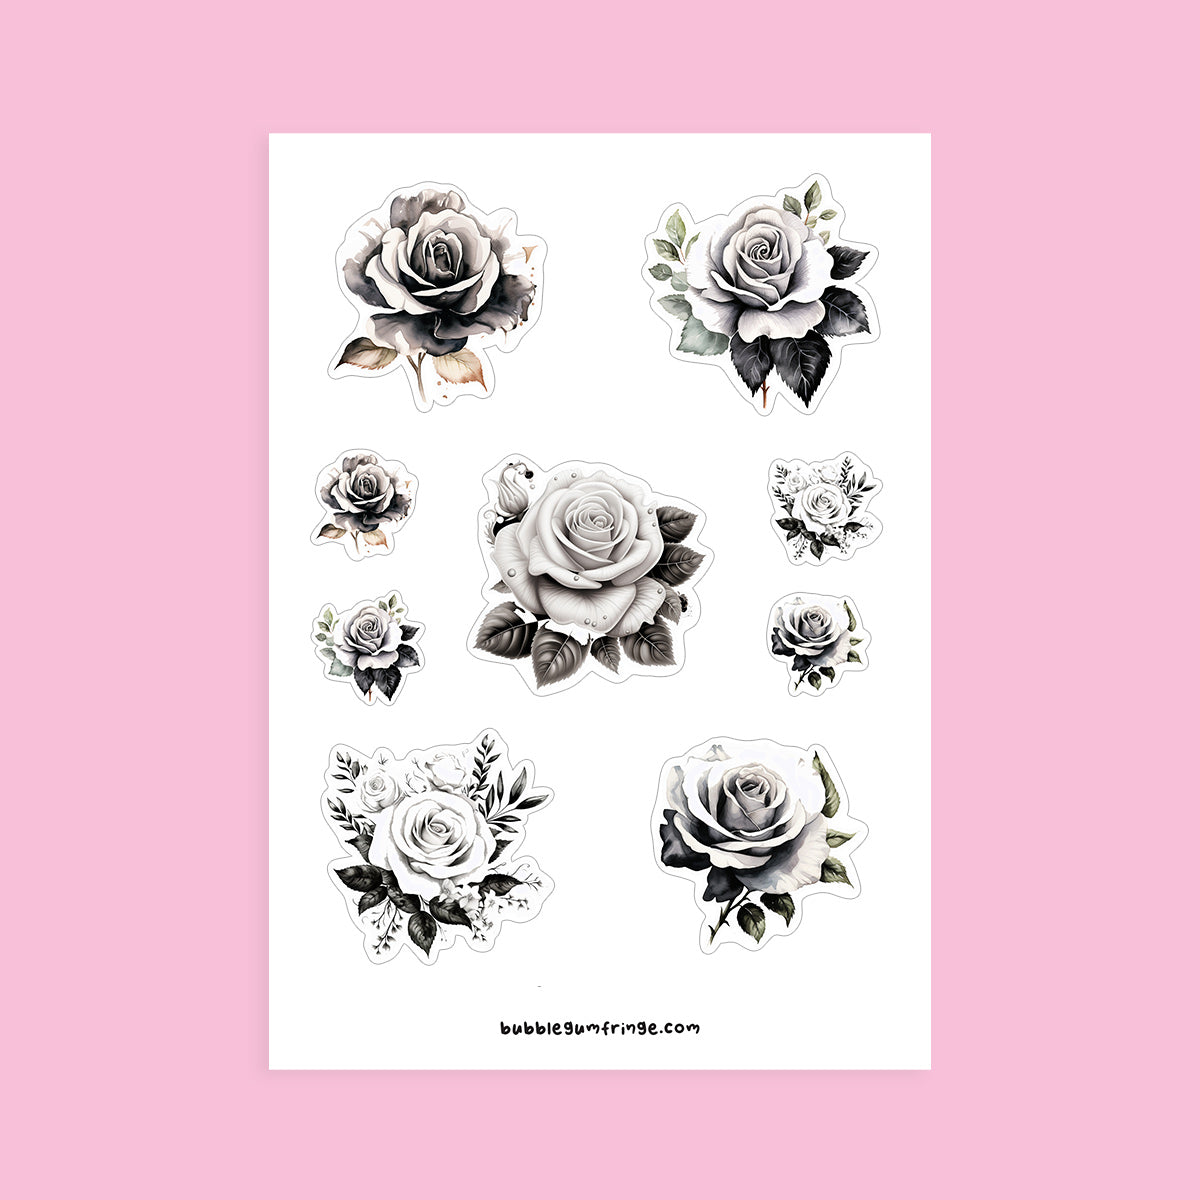 Sticker sheet with black and white roses-style 2